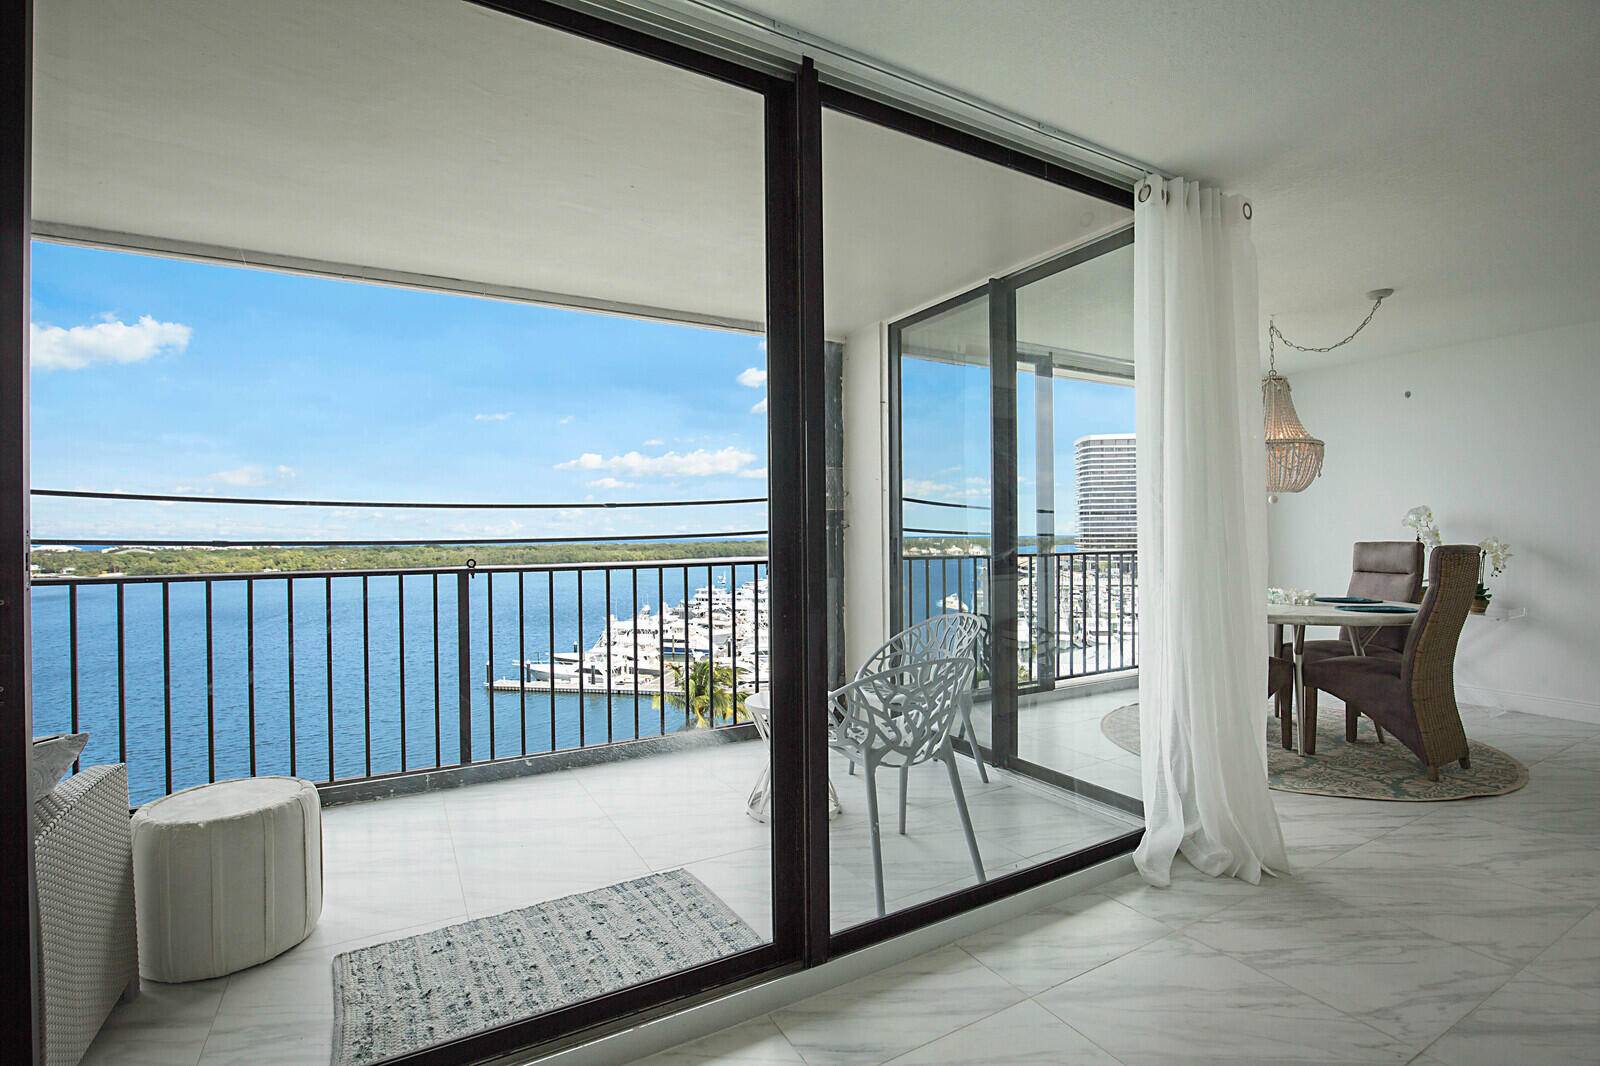 When you enter this 9th floor apartment you are met with a breathtaking view.